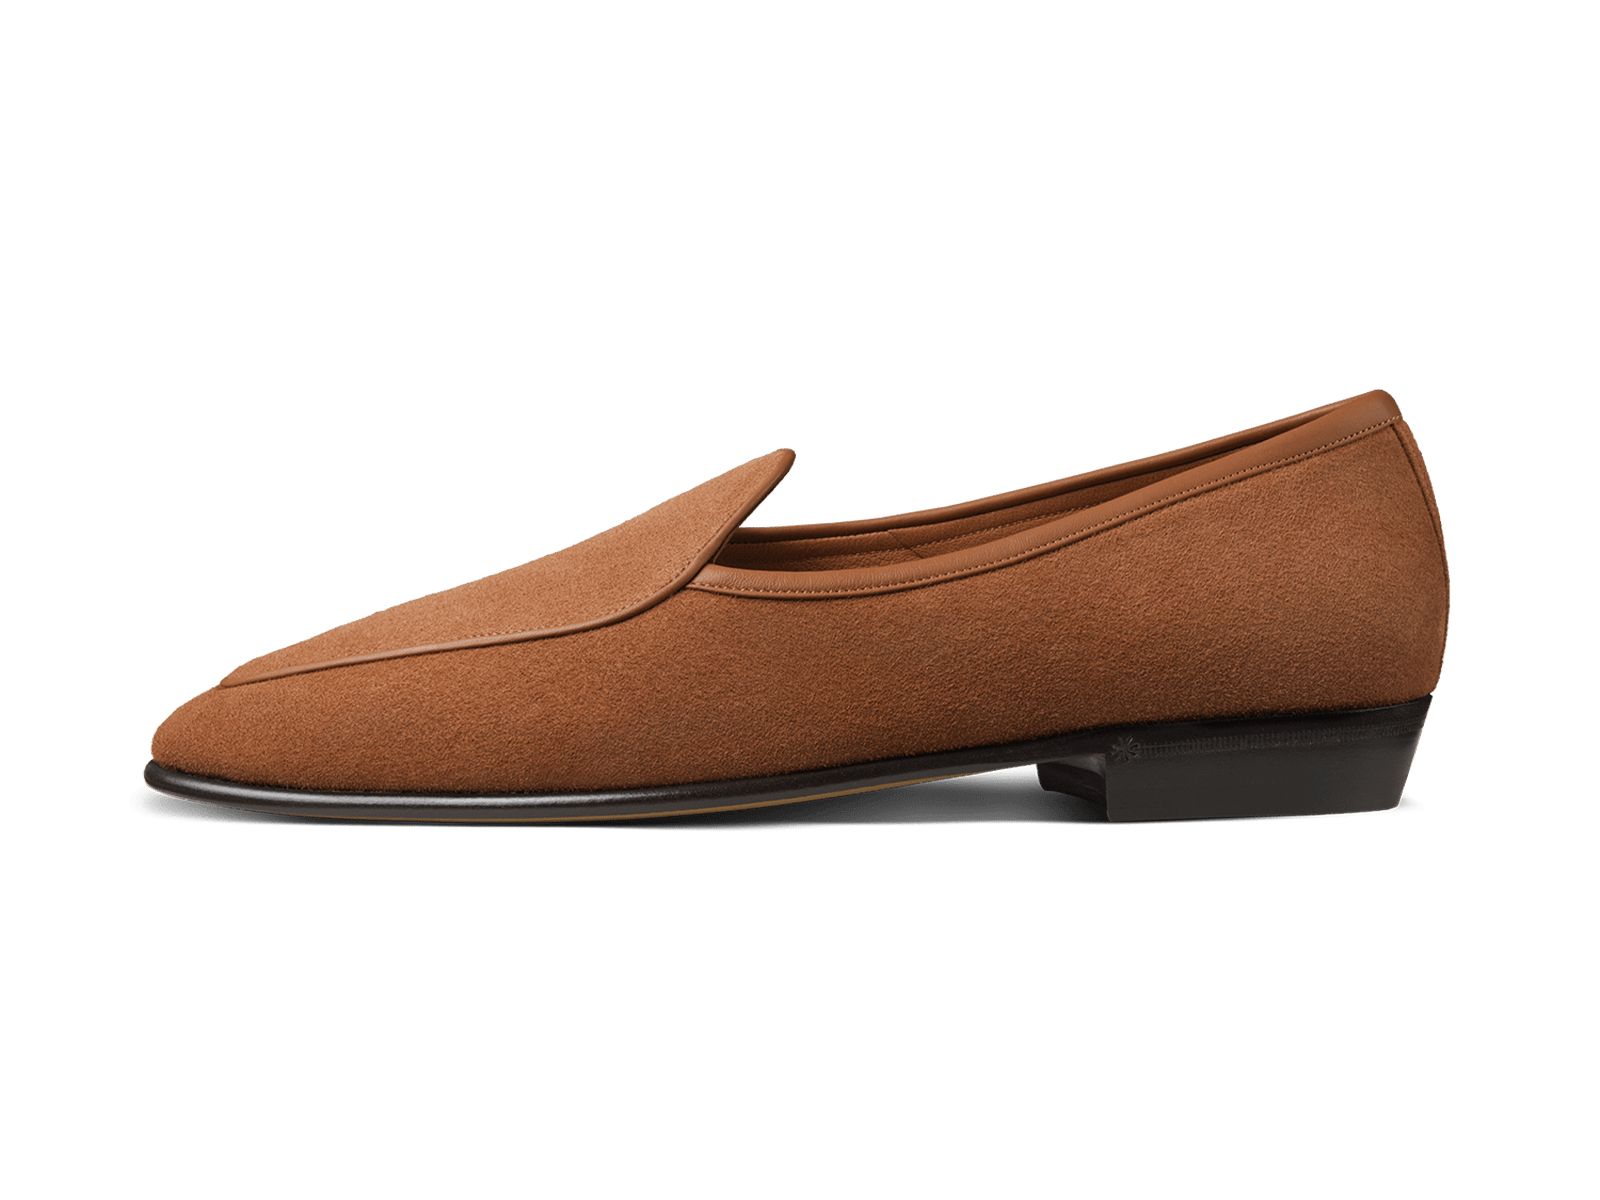 Sagan Classic Loafers in Maple Suede